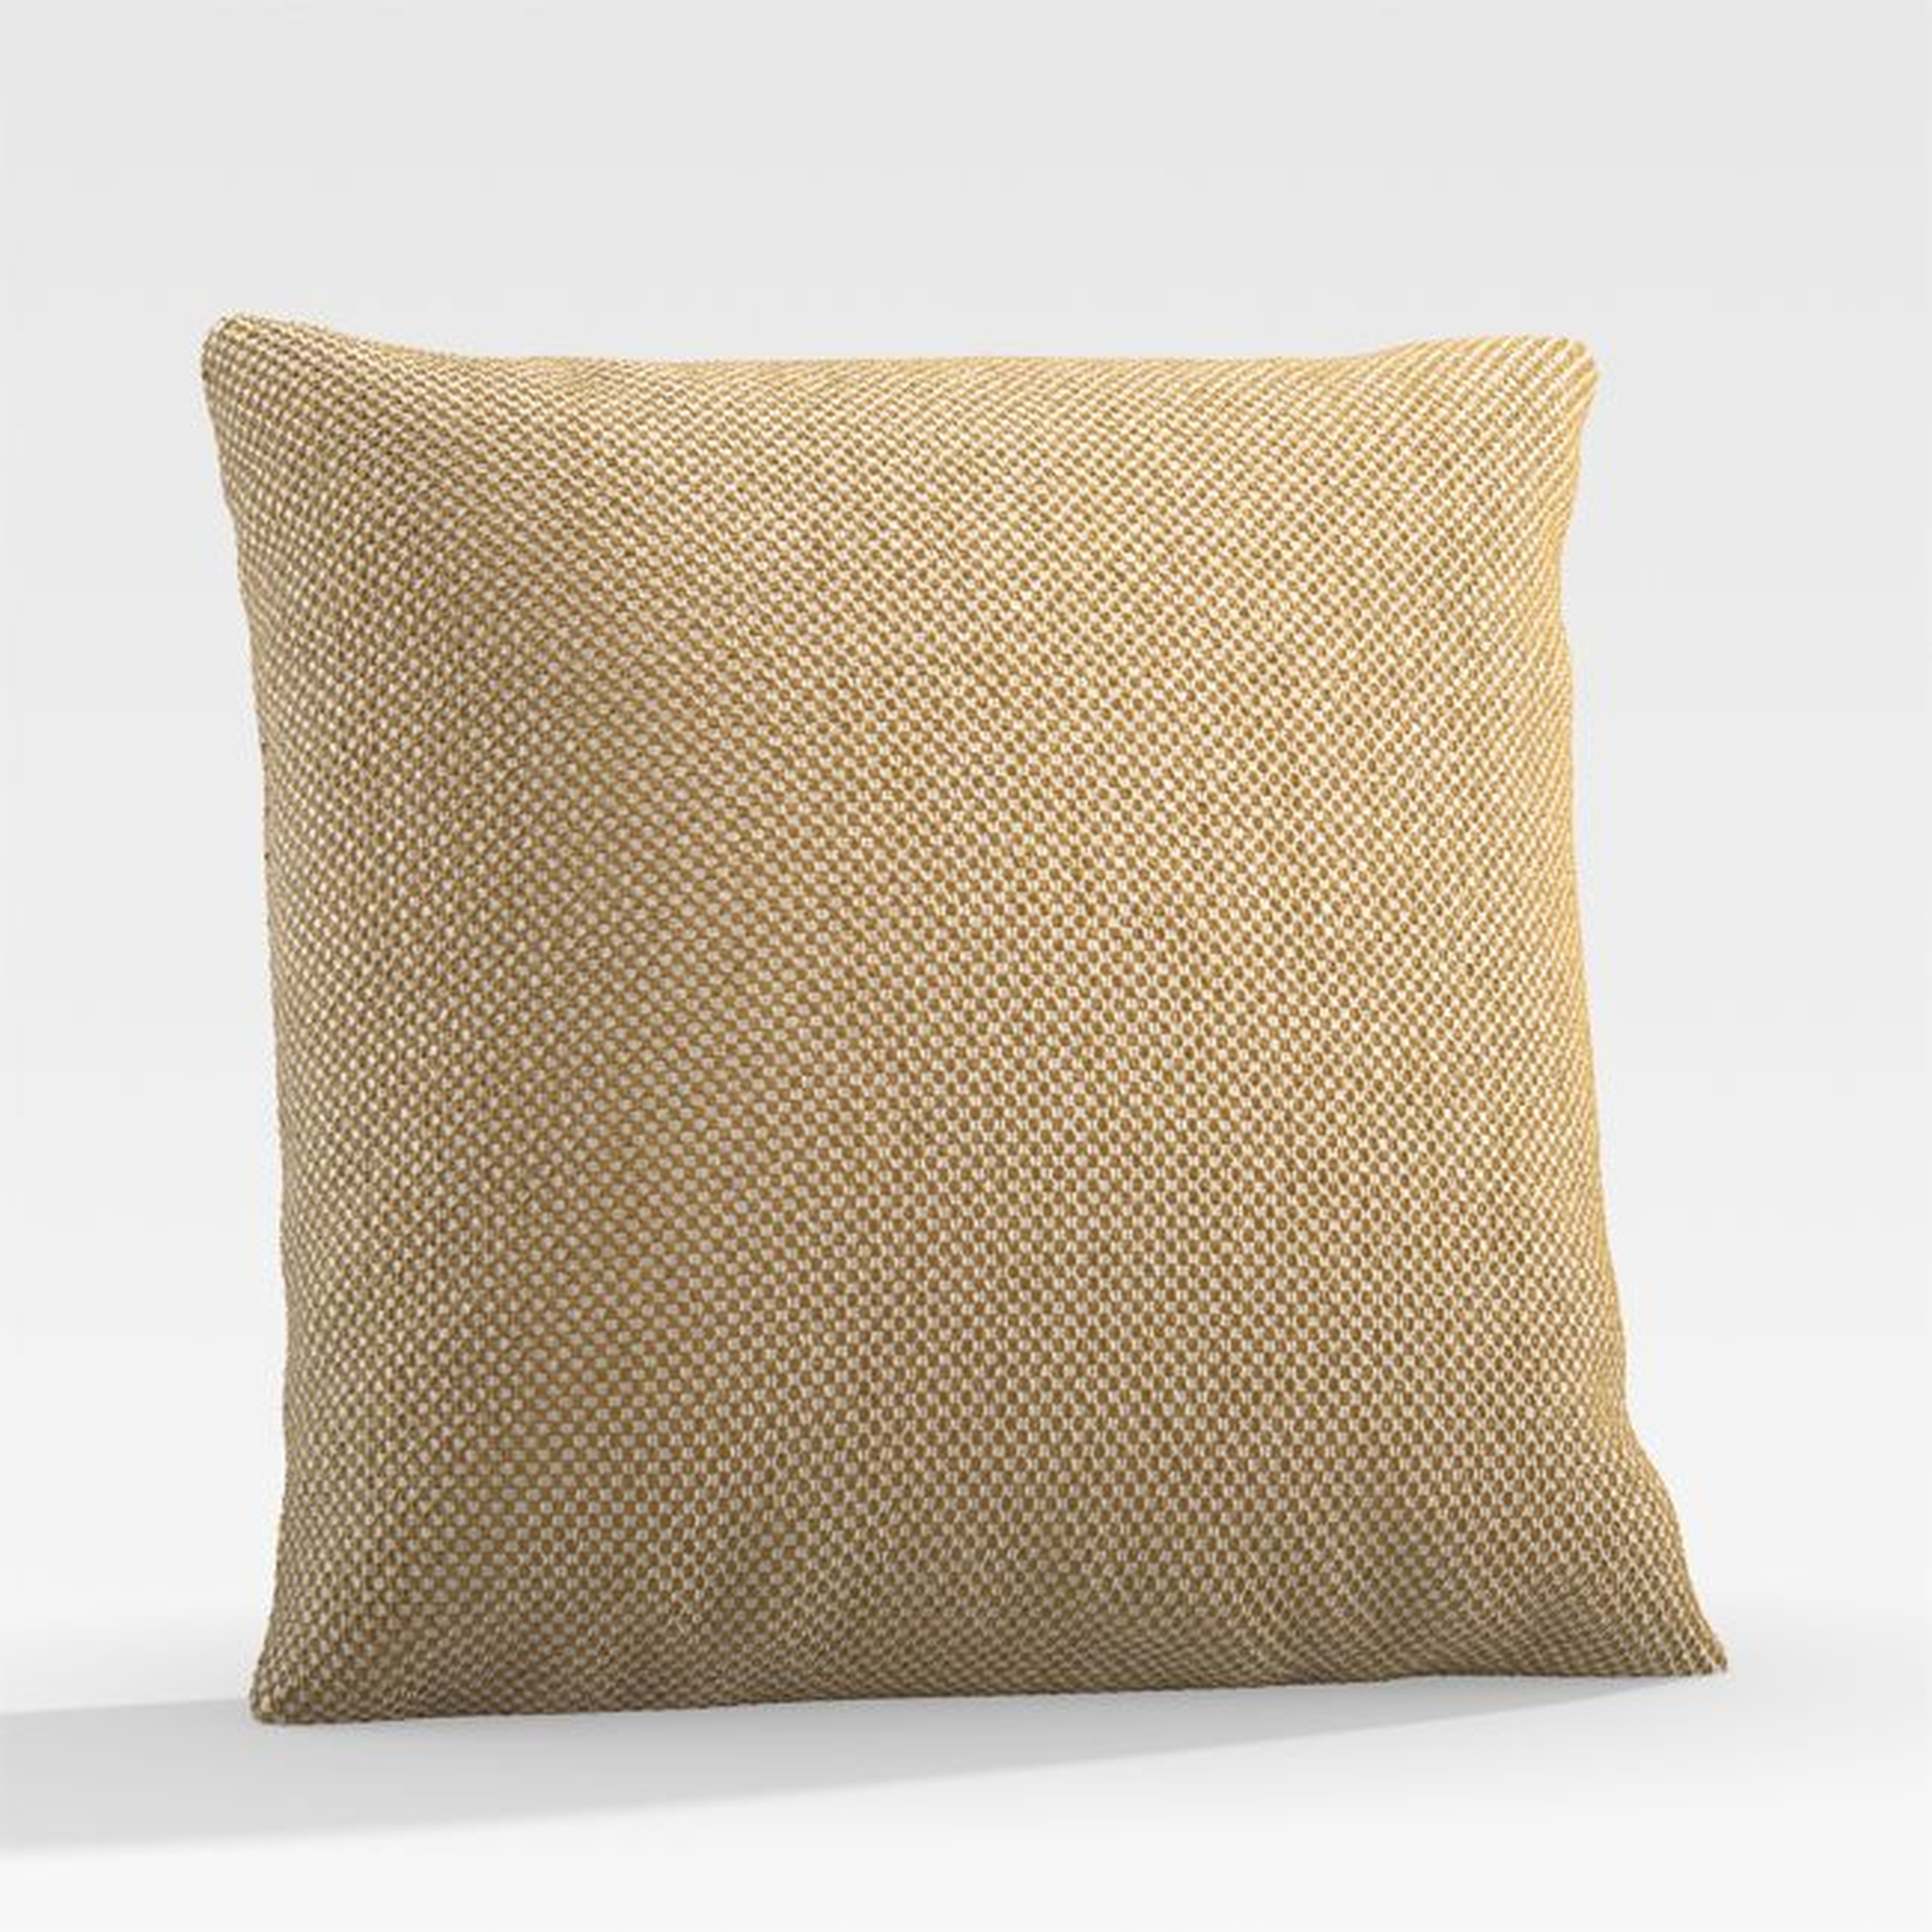 Trixie 20" Ocher Outdoor Pillow - Crate and Barrel